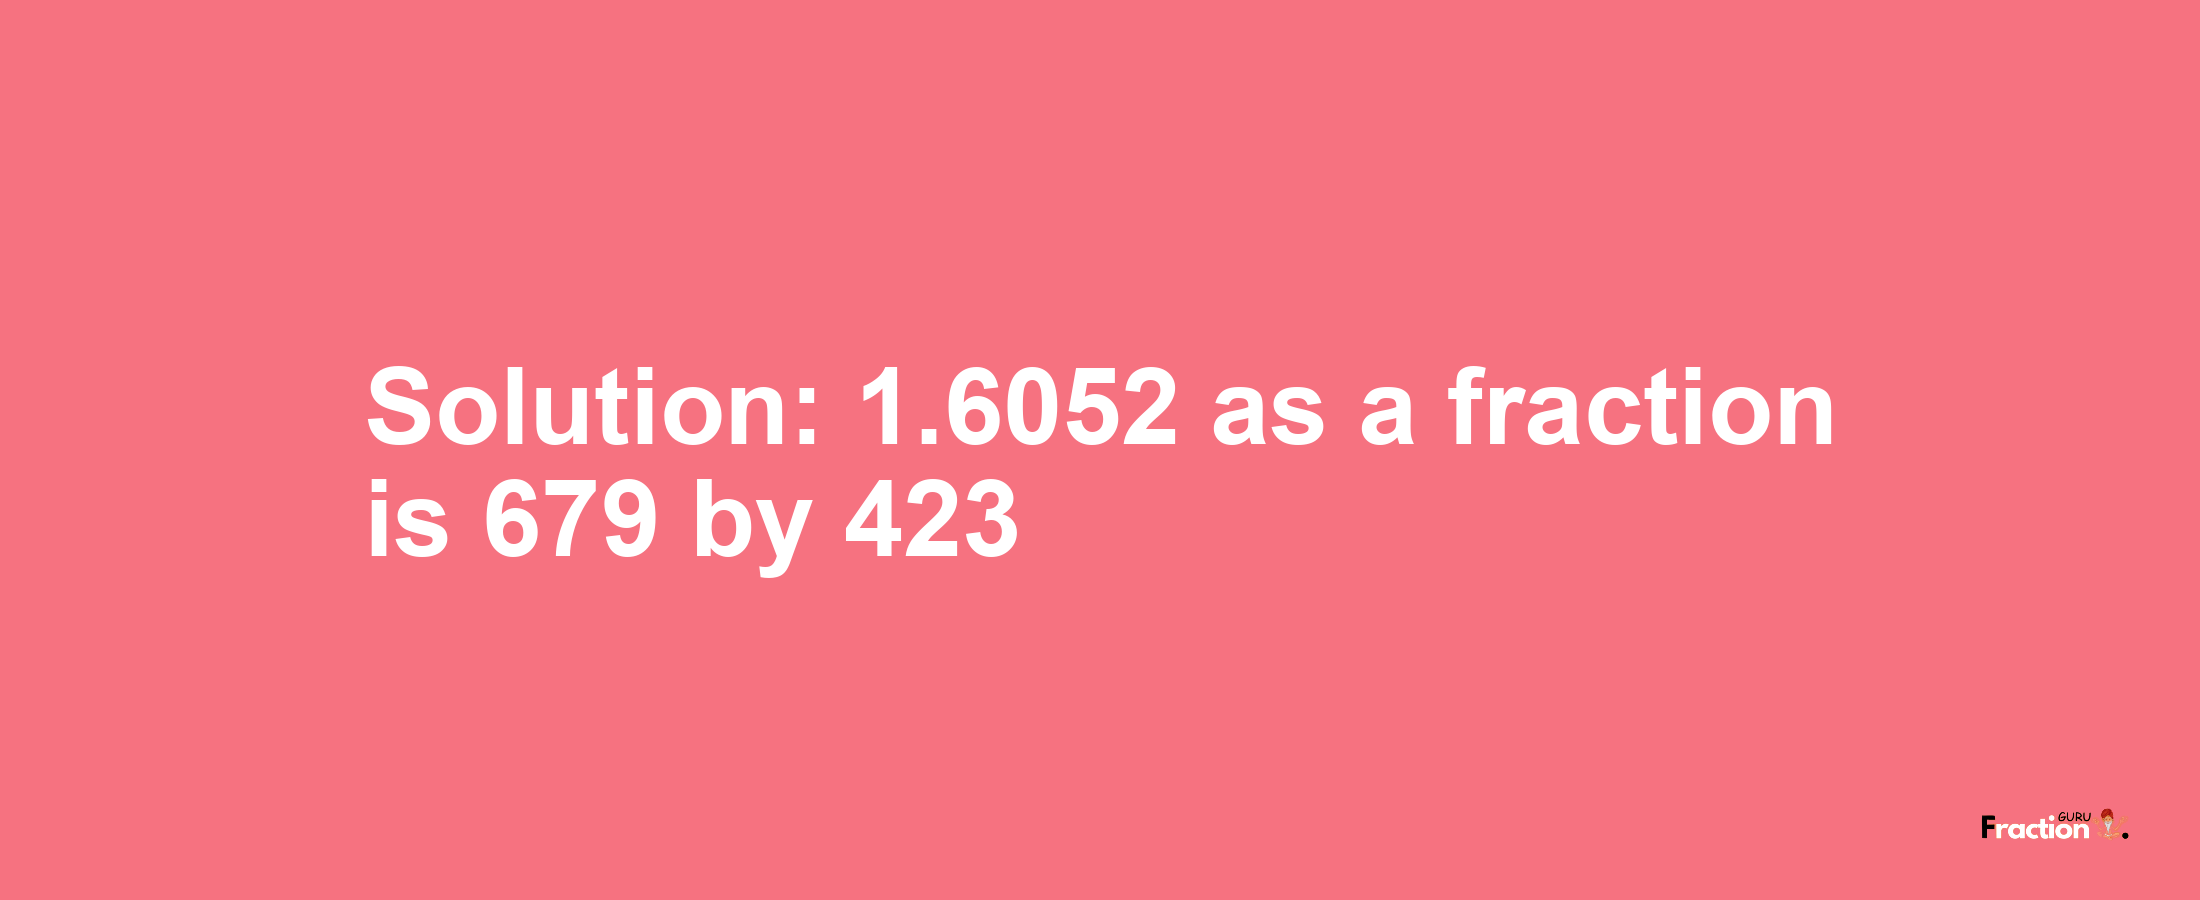 Solution:1.6052 as a fraction is 679/423